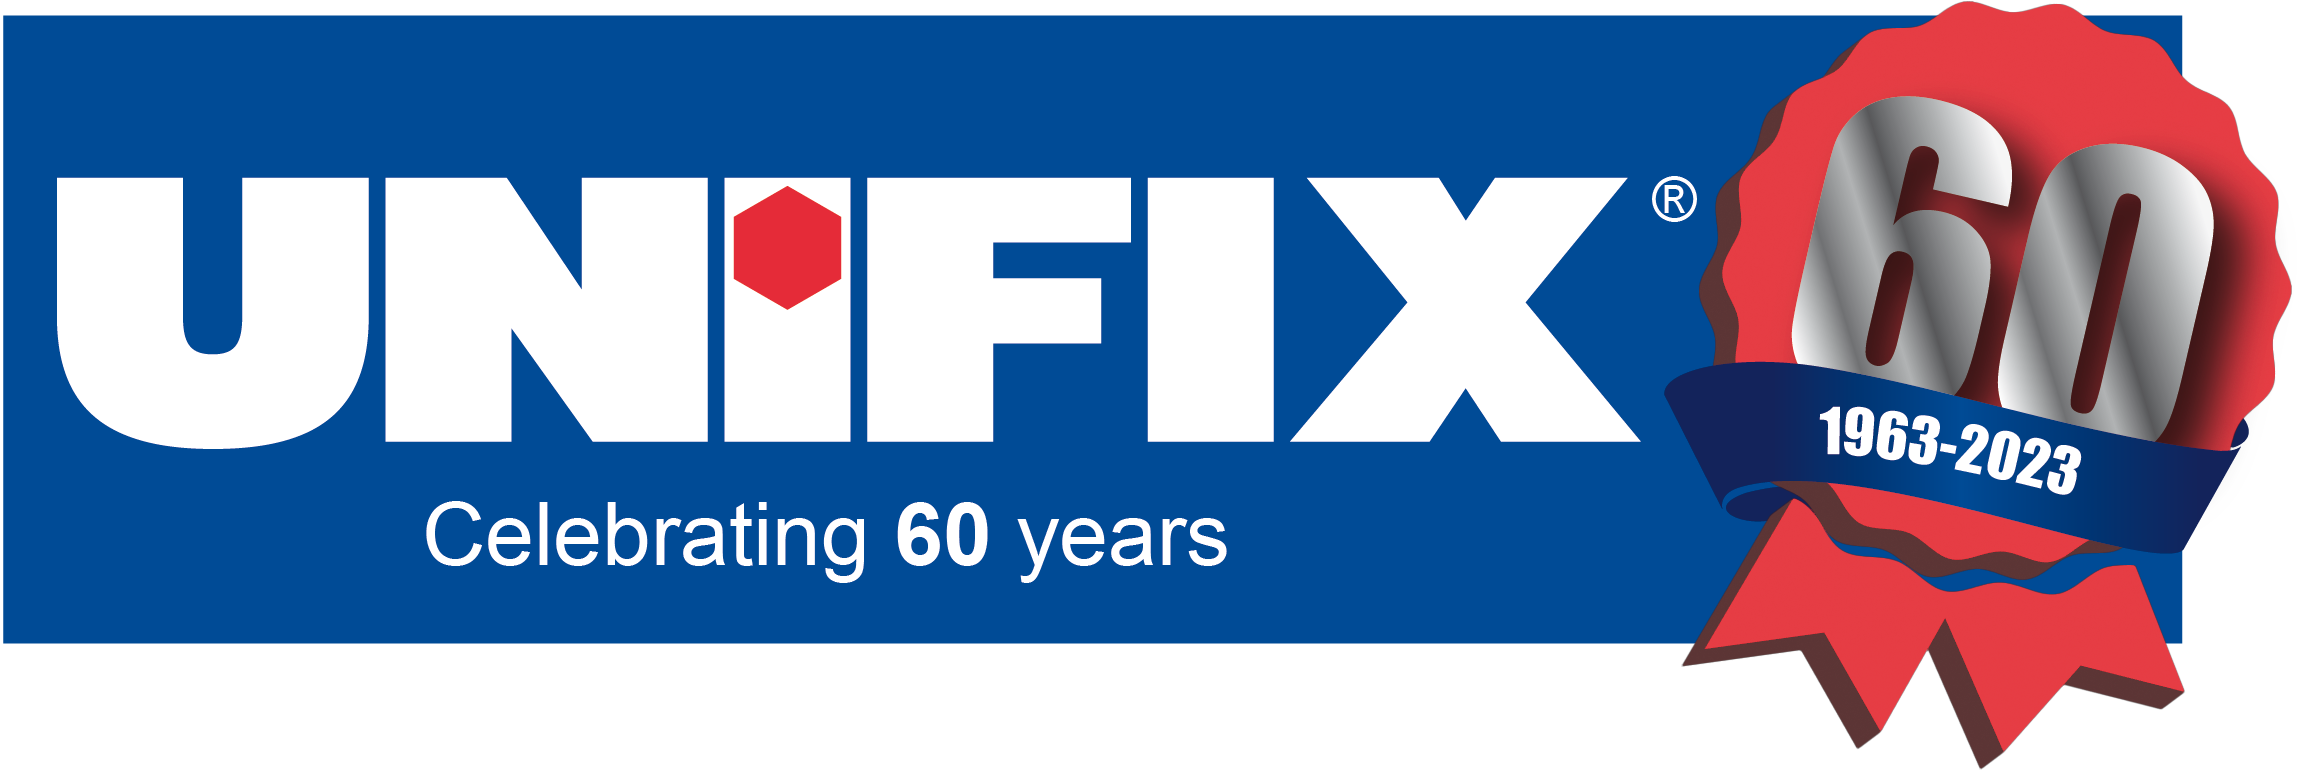 Following Owlett-Jaton marking 75 years in business last year, the organisation is celebrating annother “exciting and proud milestone” as Unifix reaches its 60th anniversary.